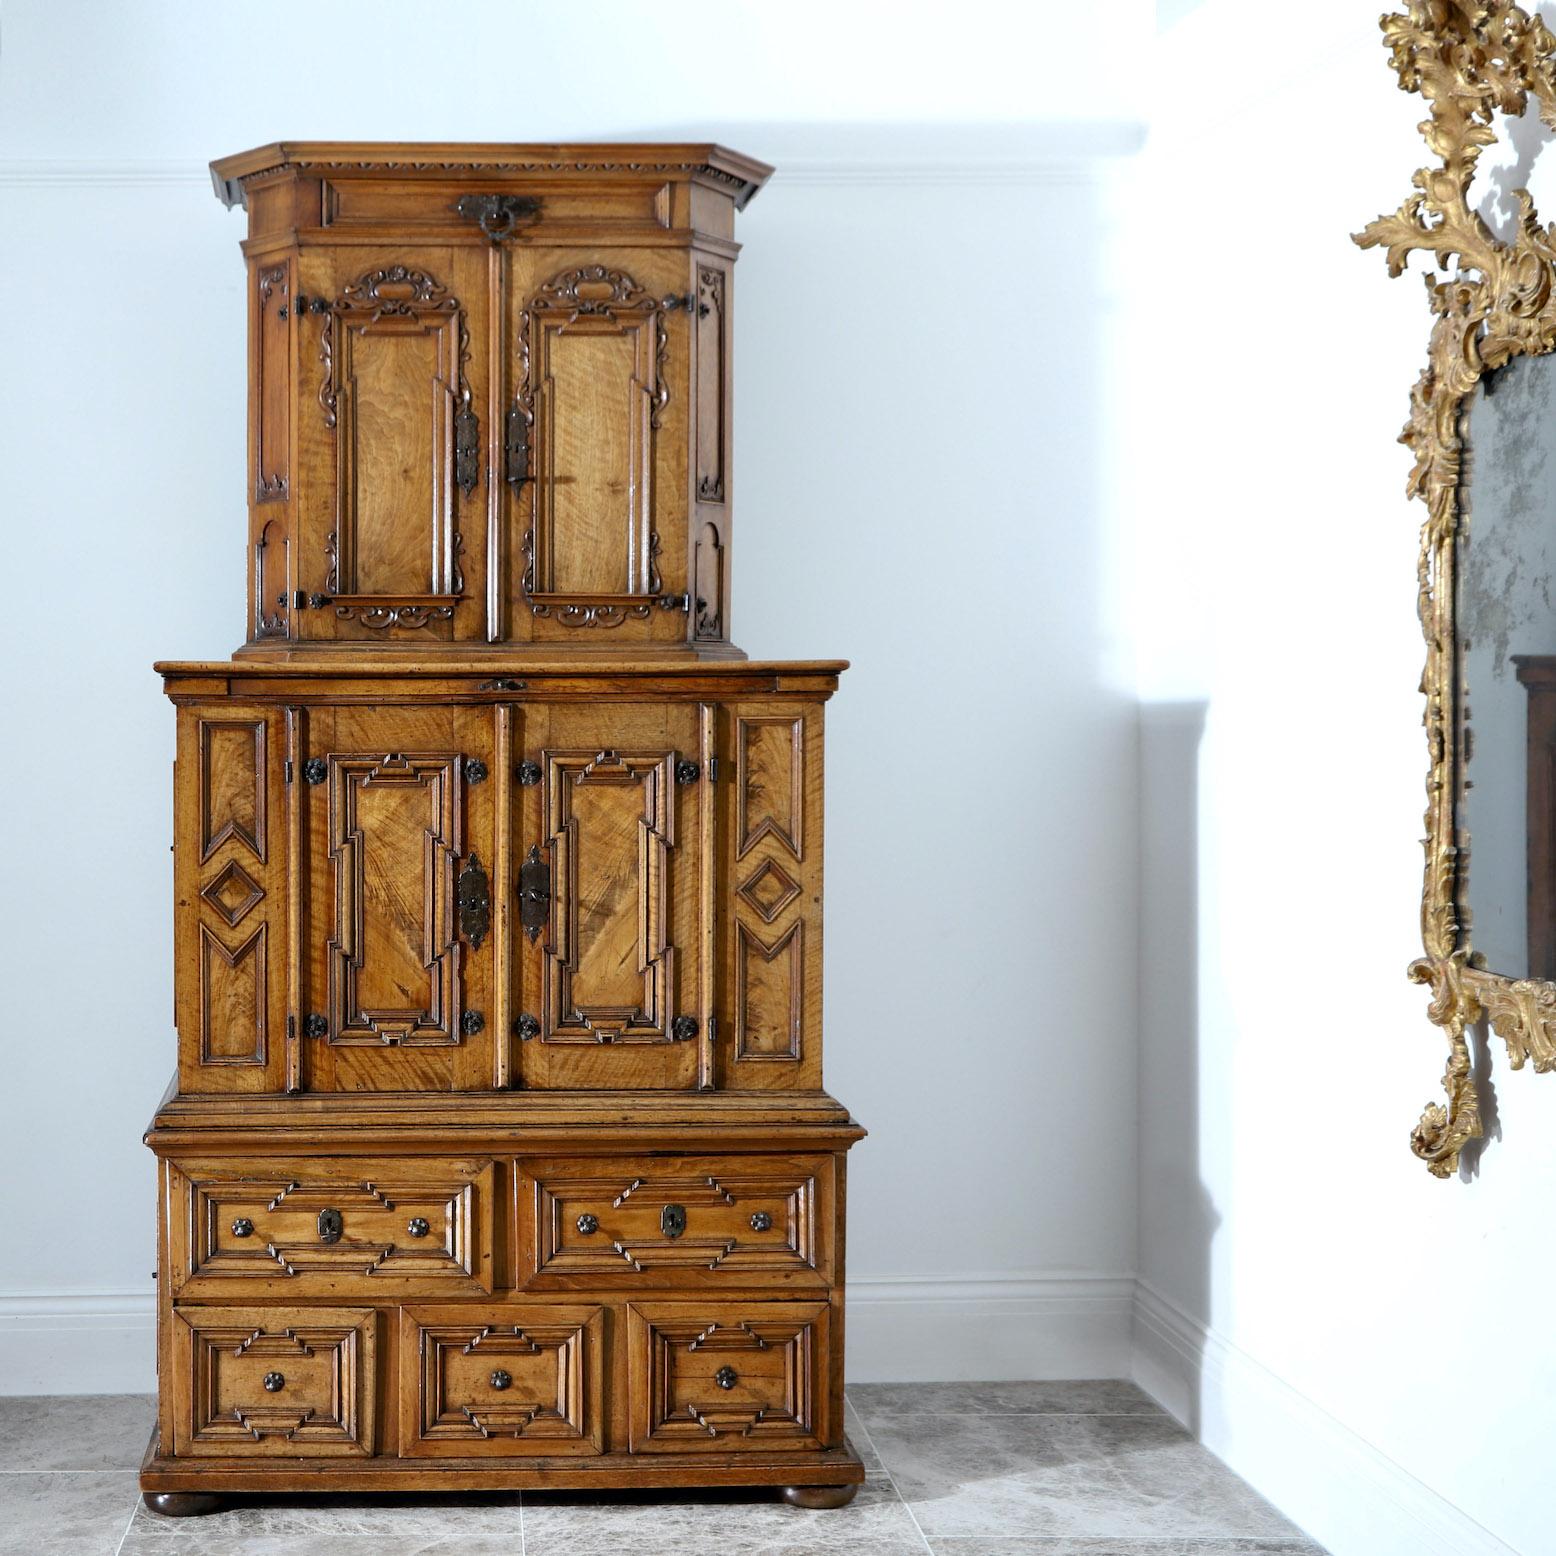 Vagabond presents an 18th century Baroque stacking chest

Austria, first half of the 18th century

” A striking walnut three tier baroque stacking chest, middle section contains an arrangement of burr walnut drawers, each section comes separately “

